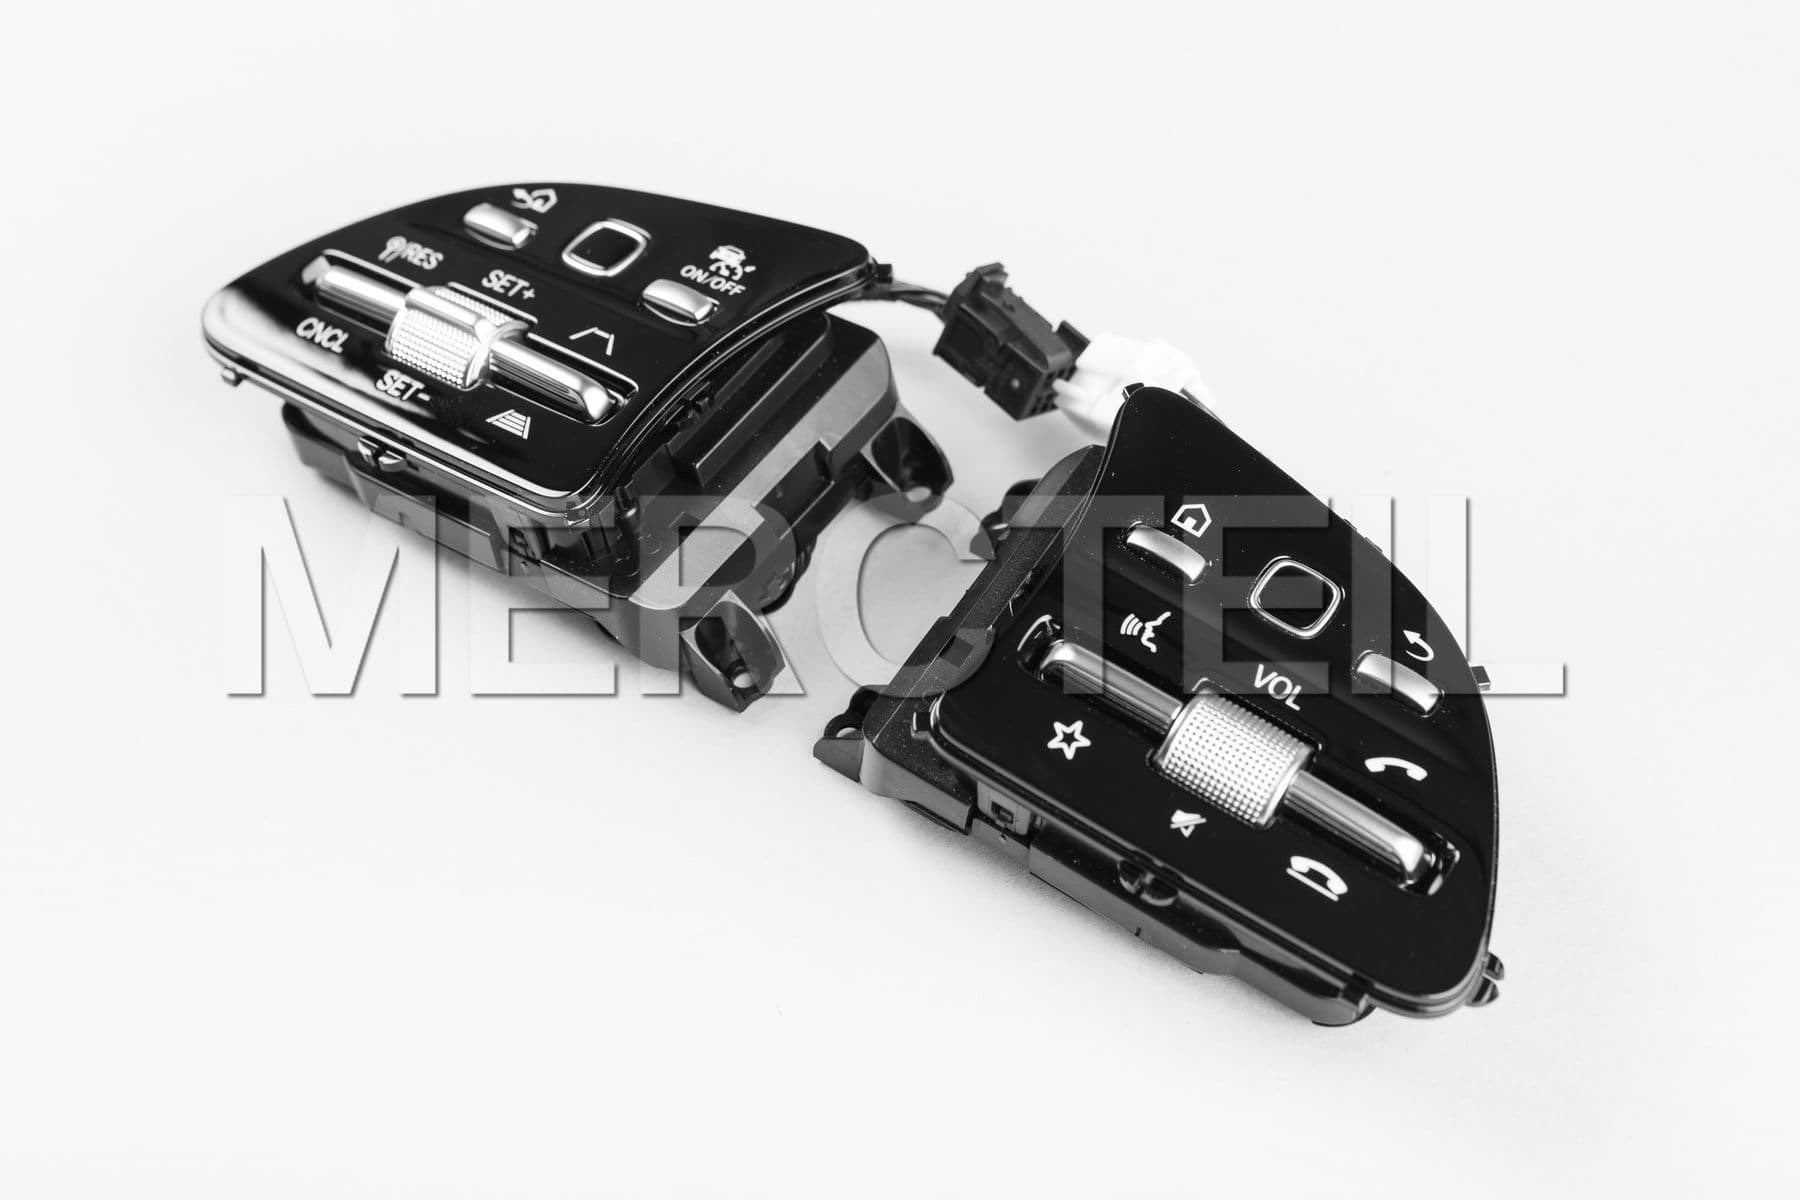 Buy the spare part Mercedes-Benz A09990589069J32 switch panel with 